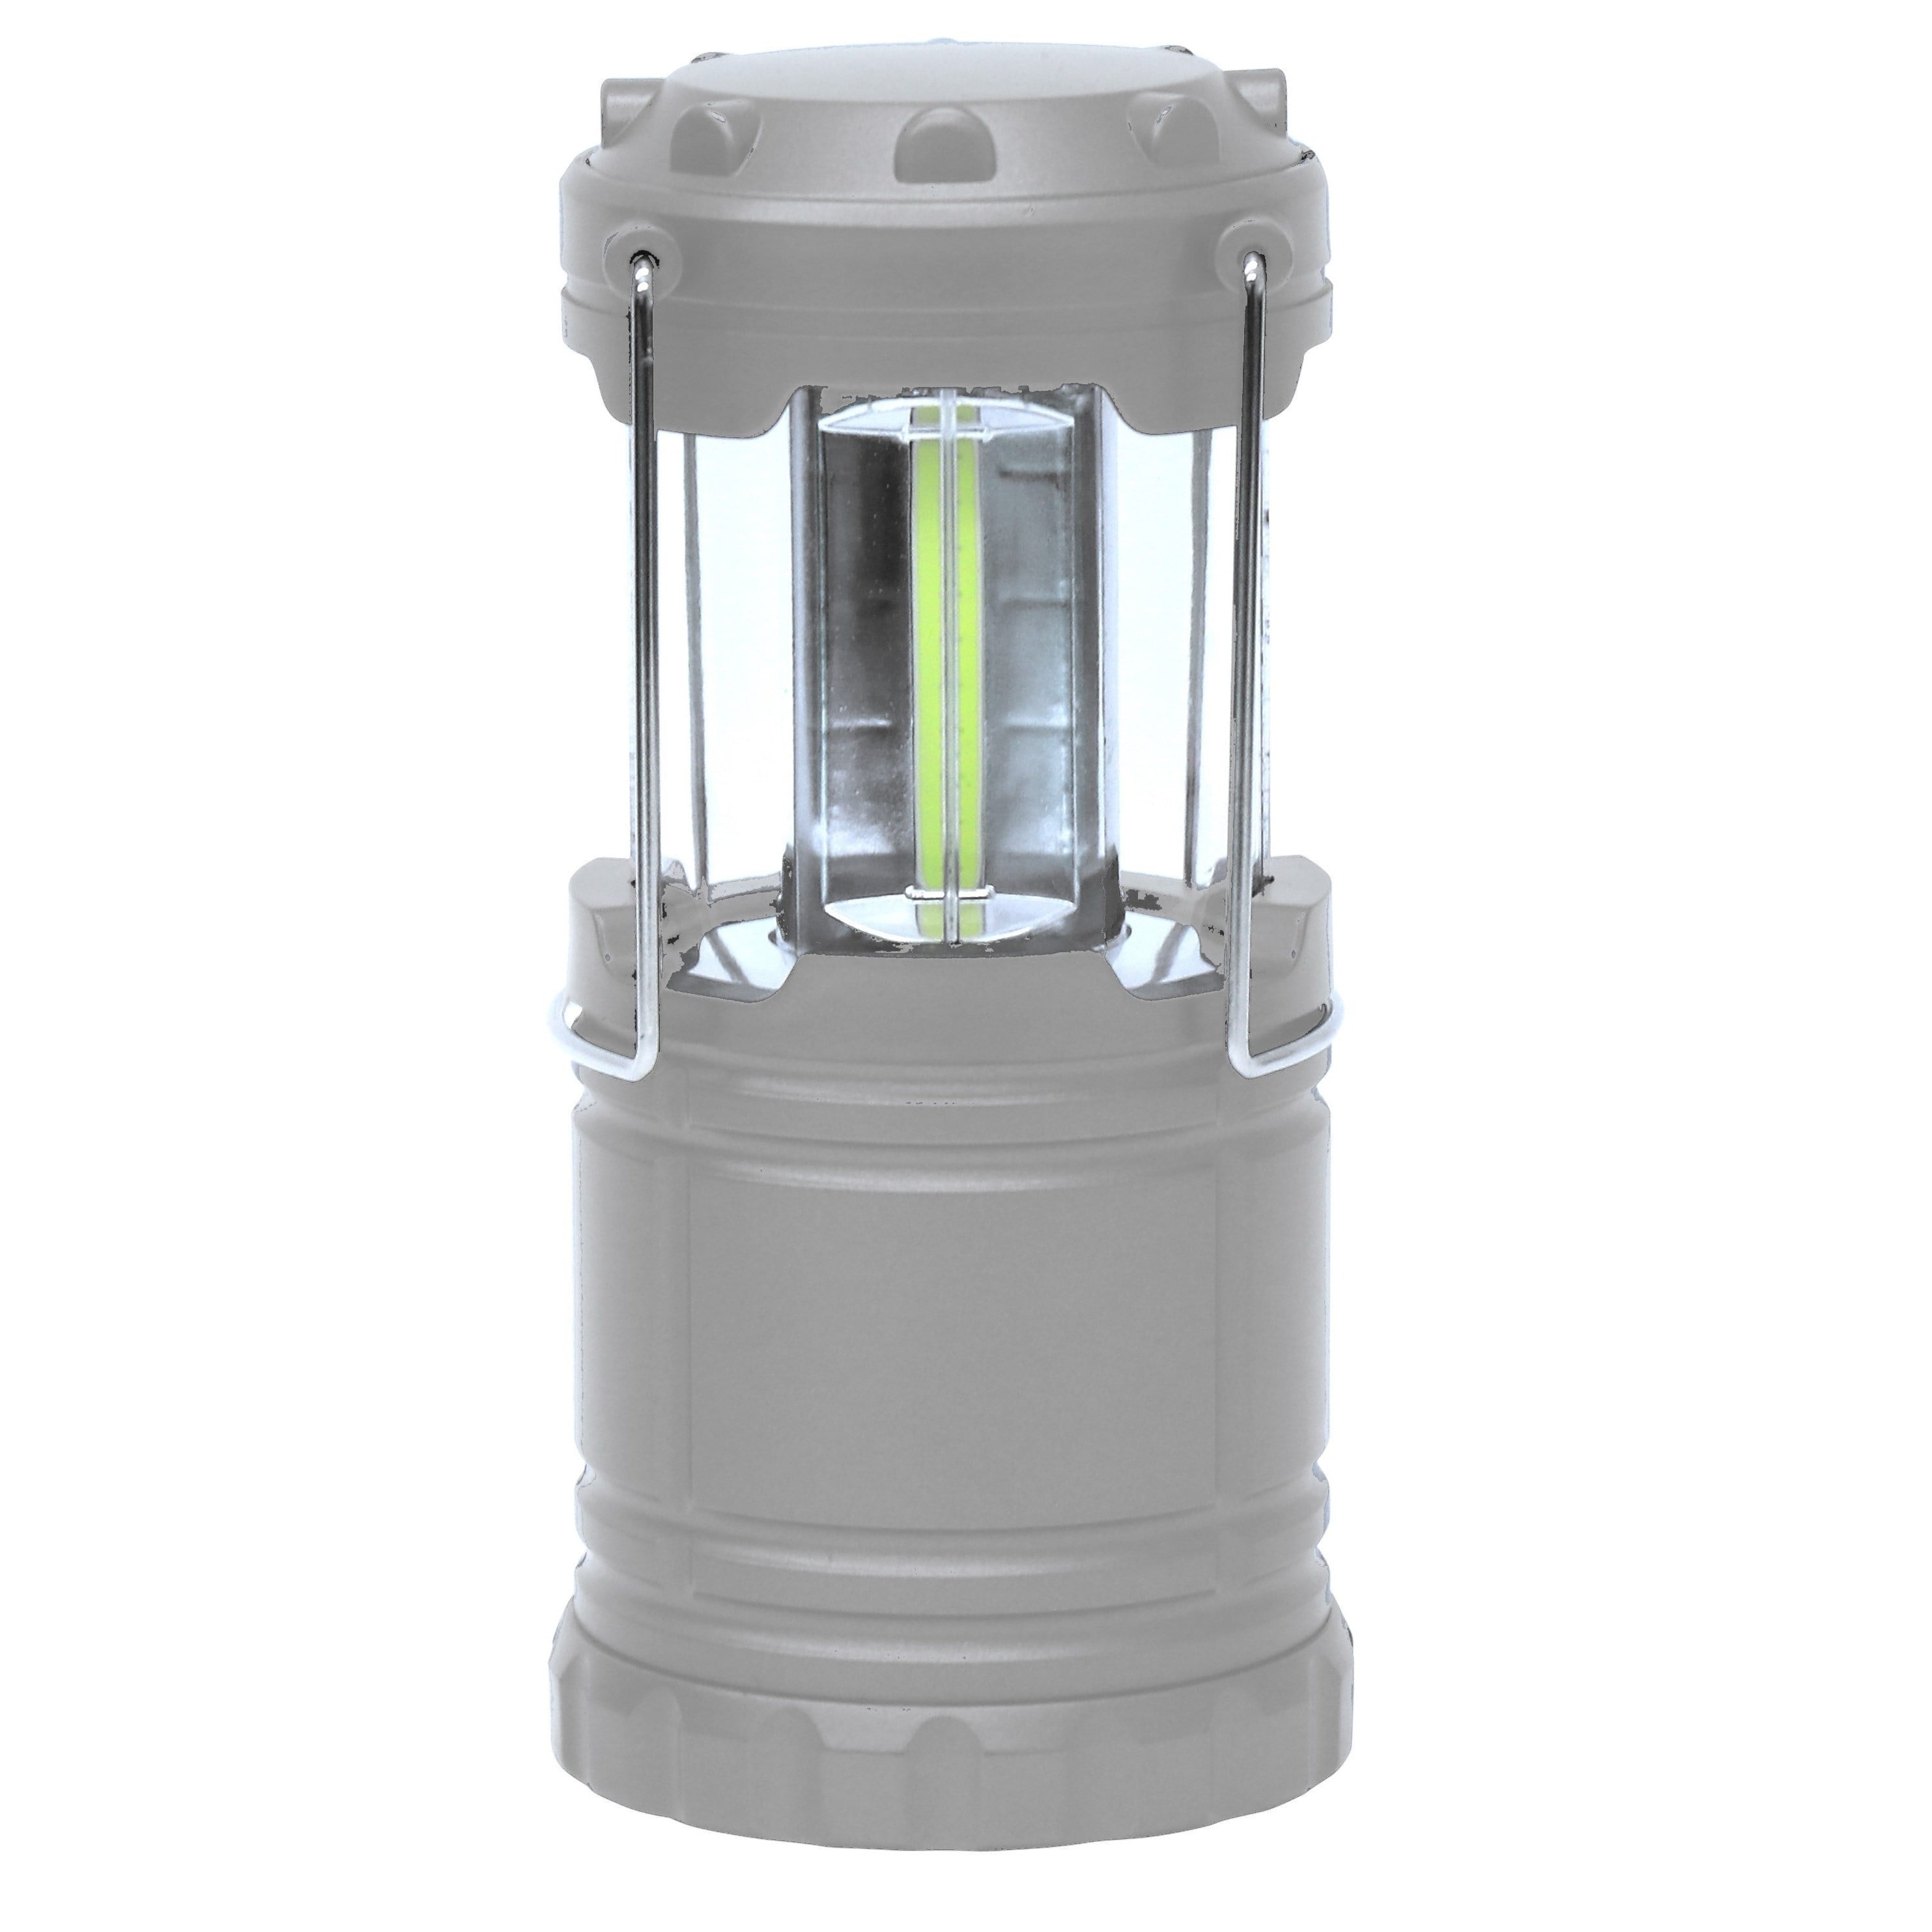 NEW! Portable, Telescoping LED Lantern, This light is amazing! I had  fairly high expectations, but the Lightranger surpassed them all! Amazingly  bright, and so versatile. The LightRanger is a